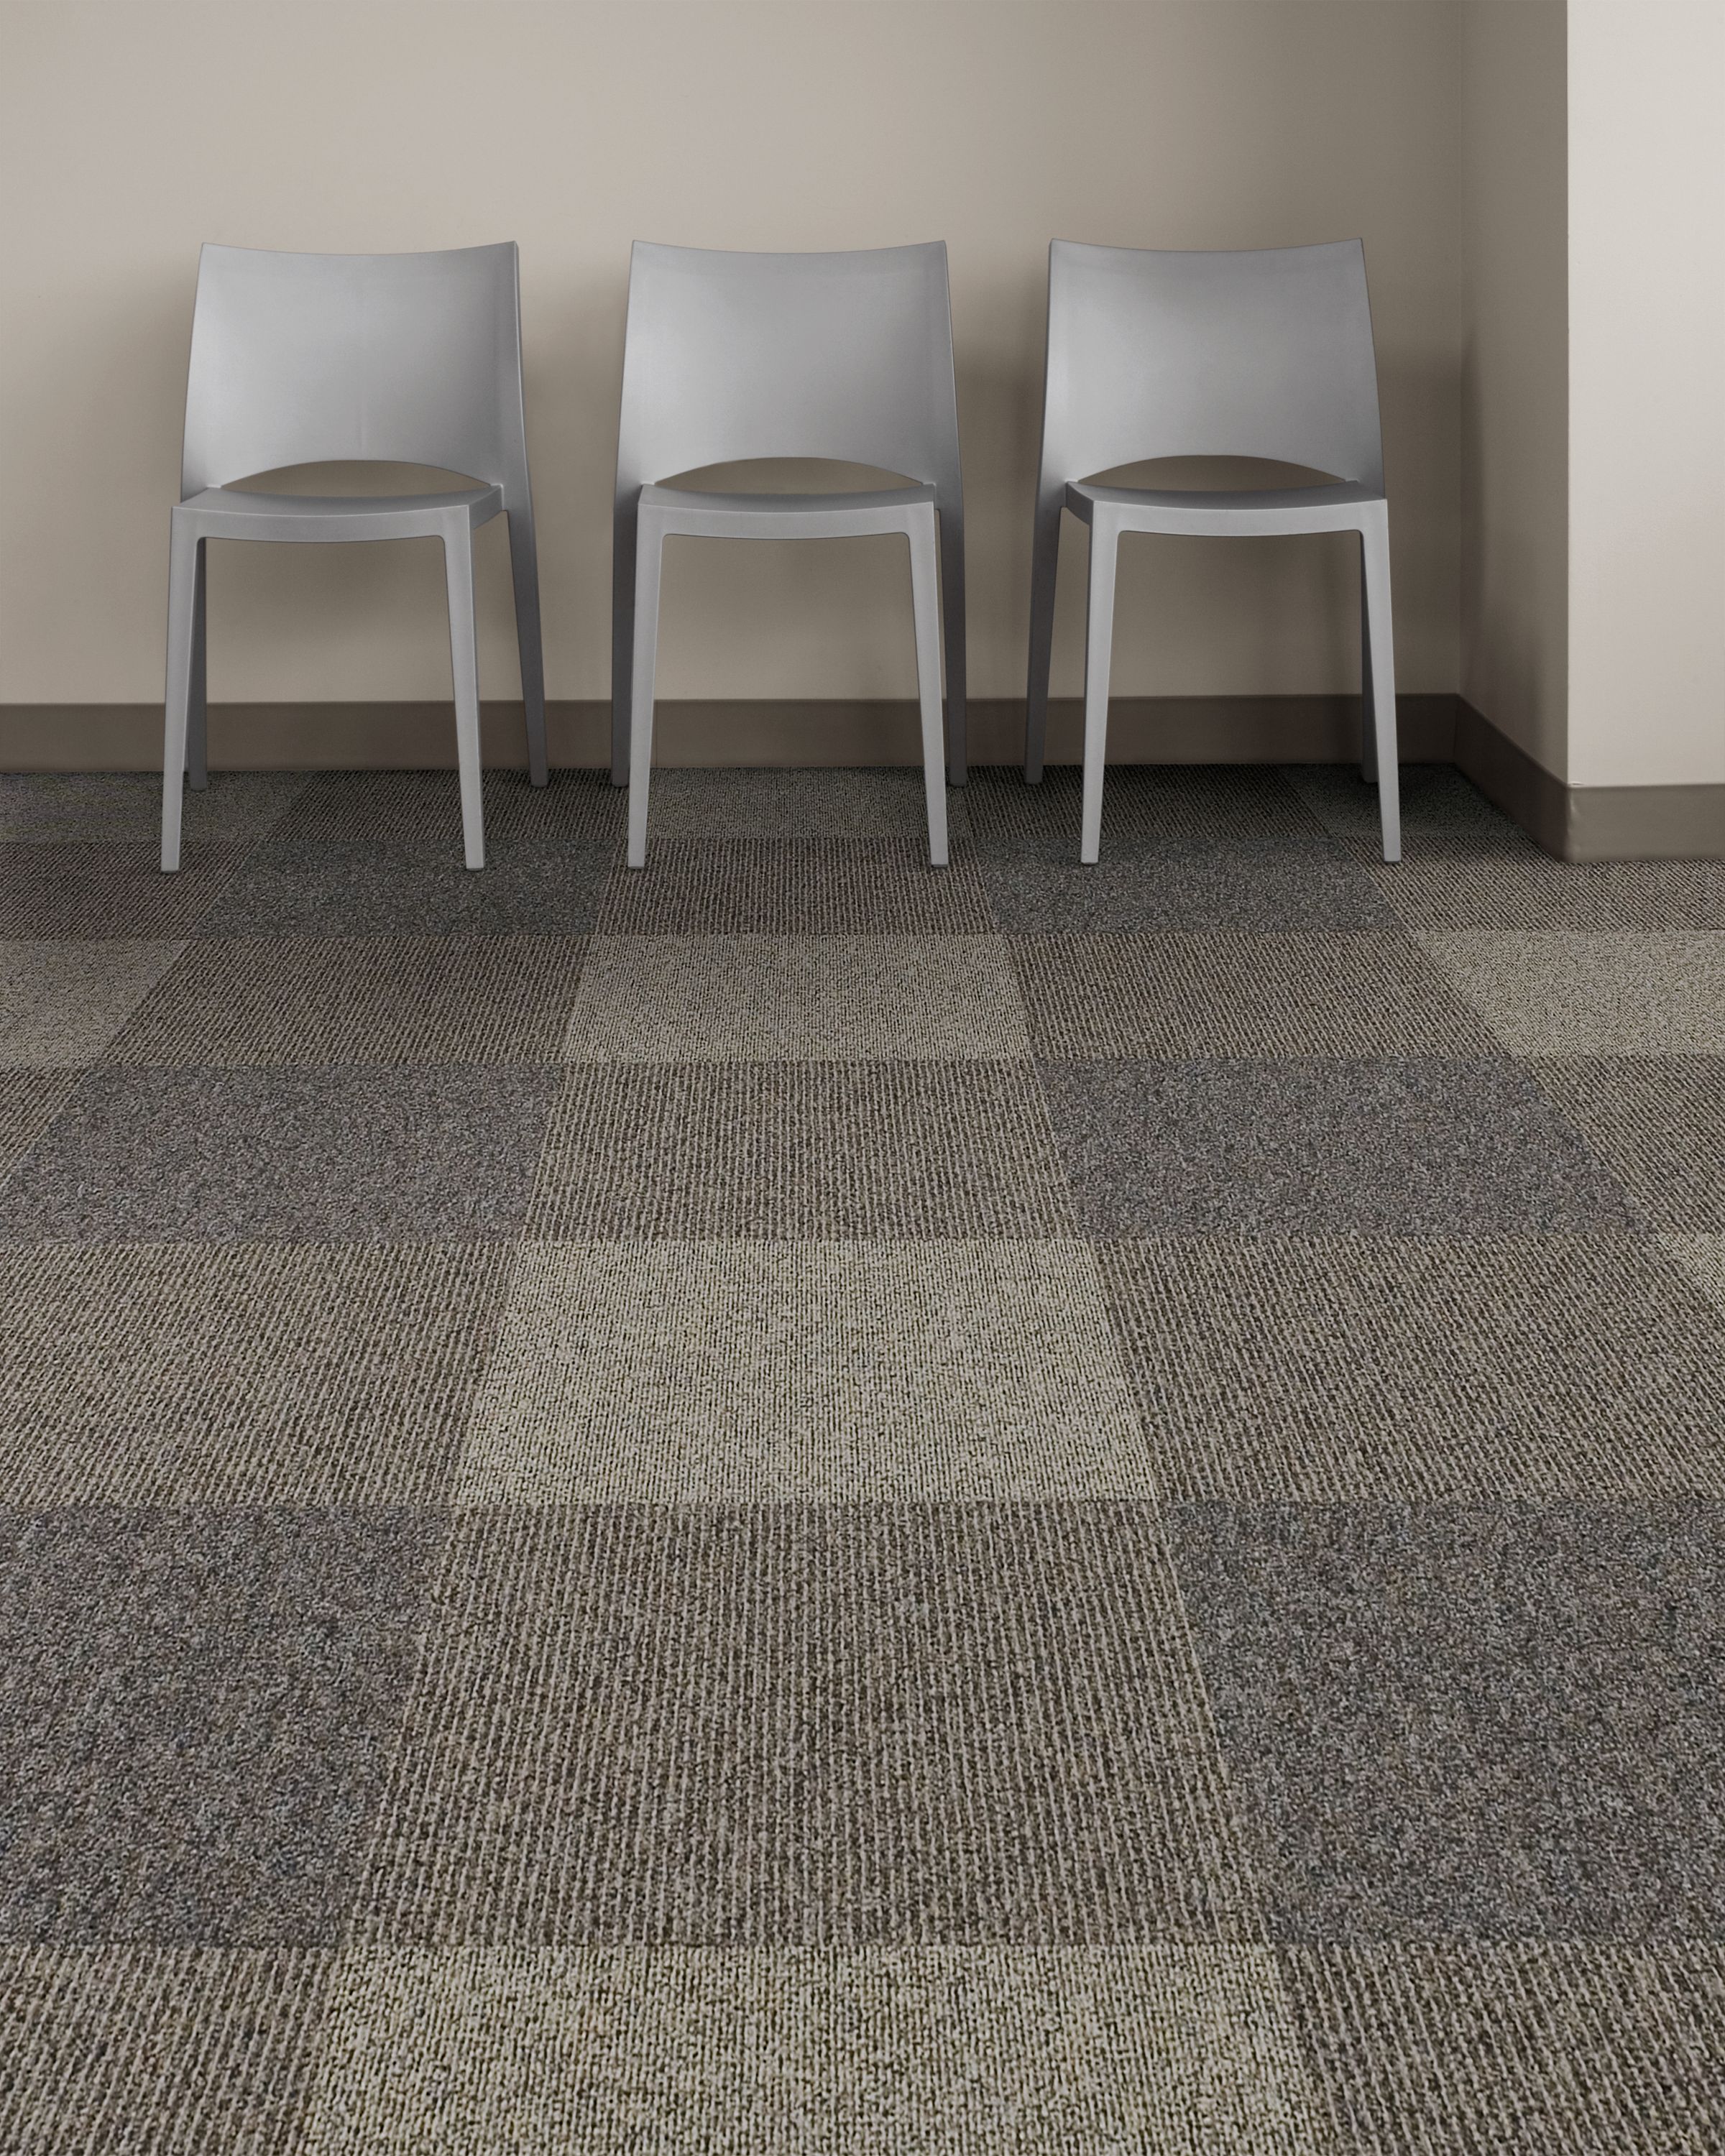 Interface Broomed, Grooved and Brushed carpet tile in room with three chairs imagen número 6